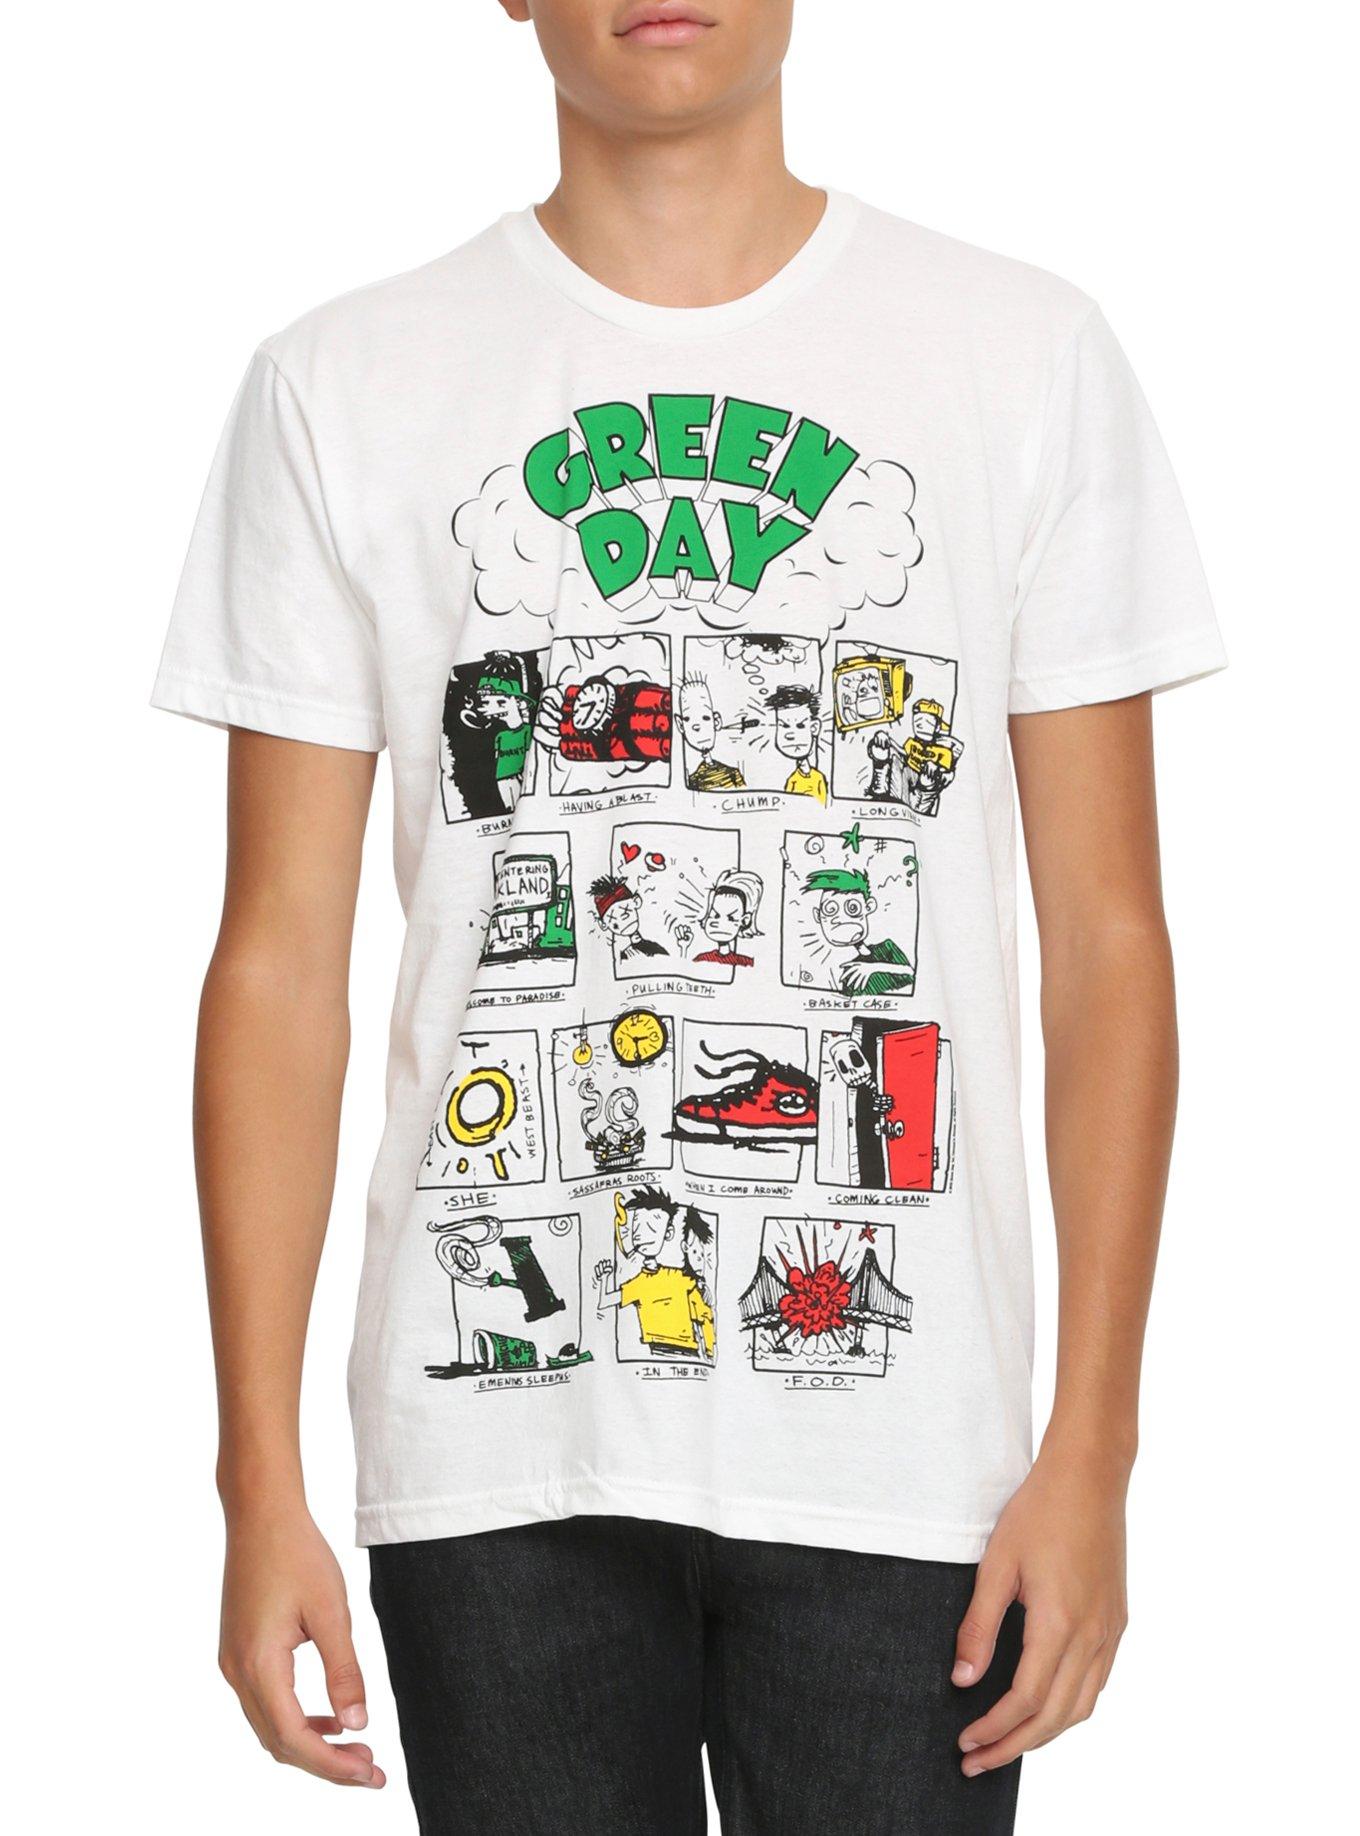 Green Day Dookie Songs T-Shirt